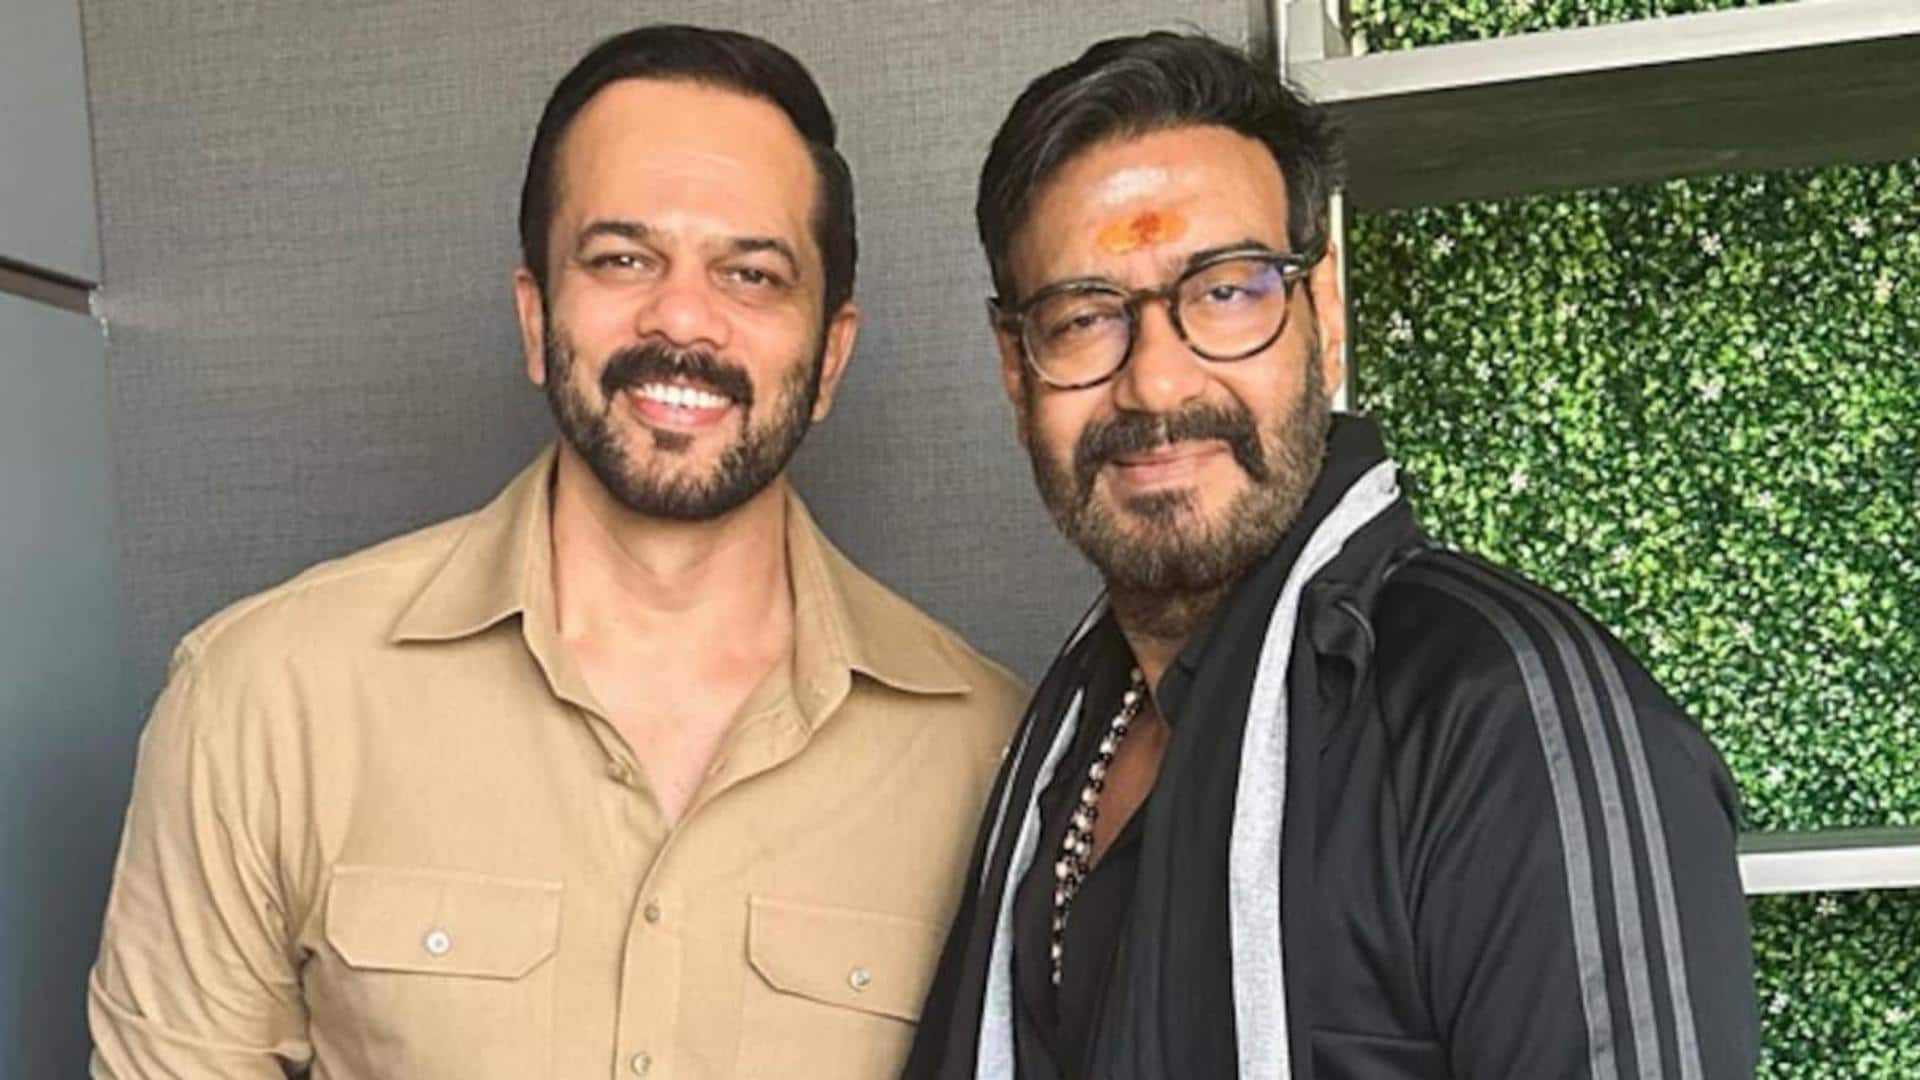 Rohit Shetty to direct 'Golmaal 5' after 'Singham 3'